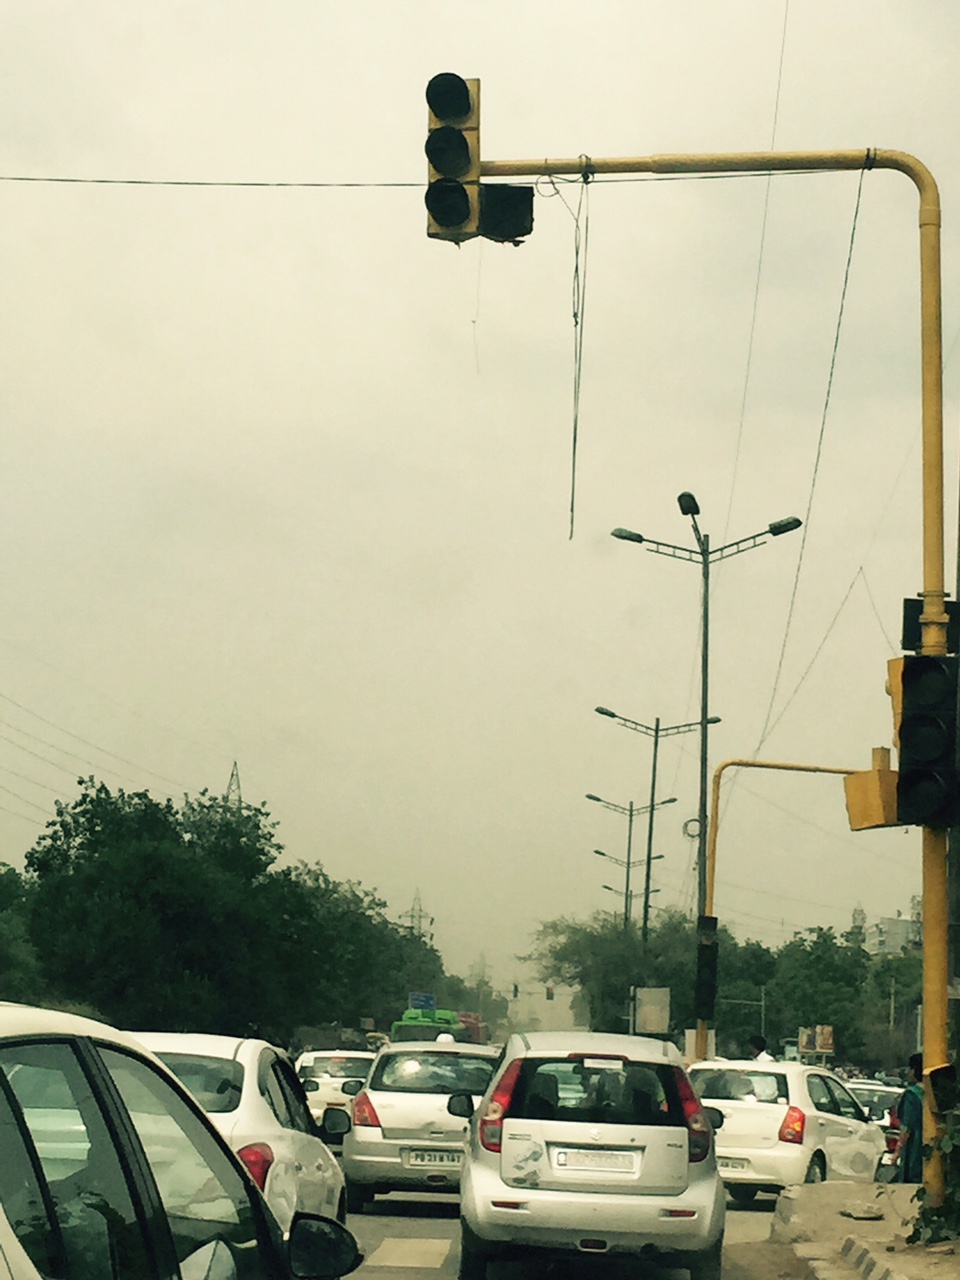 Traffic lights in Delhi are frequently non-functional;leading to noisy traffic snarls that significantly exacerbate air pollution; the sky at 10 am is not cloudy but full of dust.